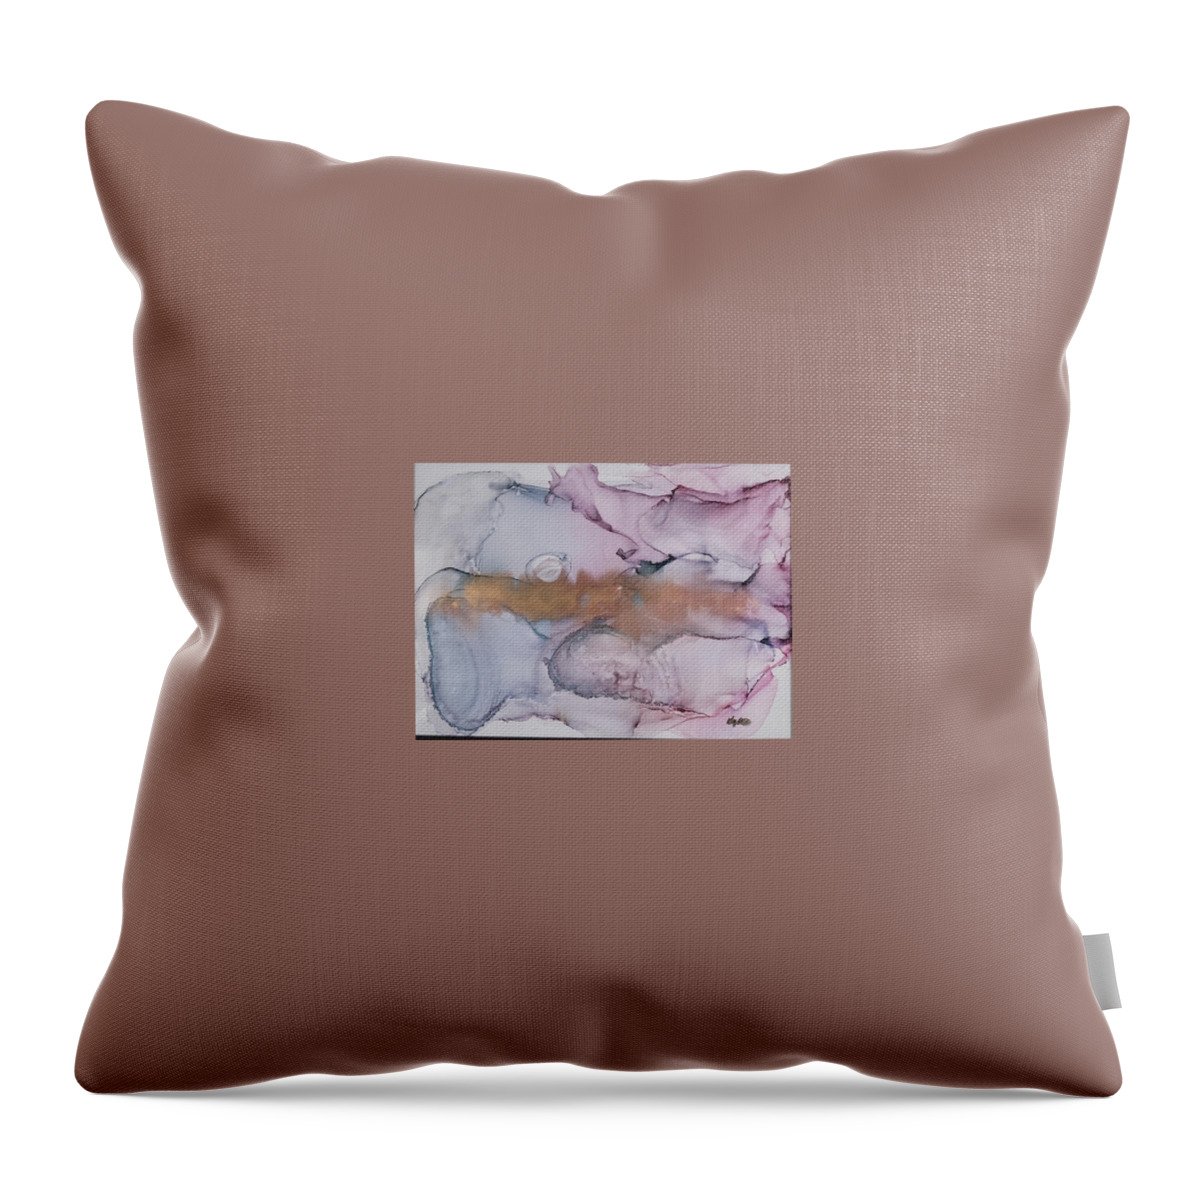 Night Throw Pillow featuring the painting The Foggy Night by Katy Bishop